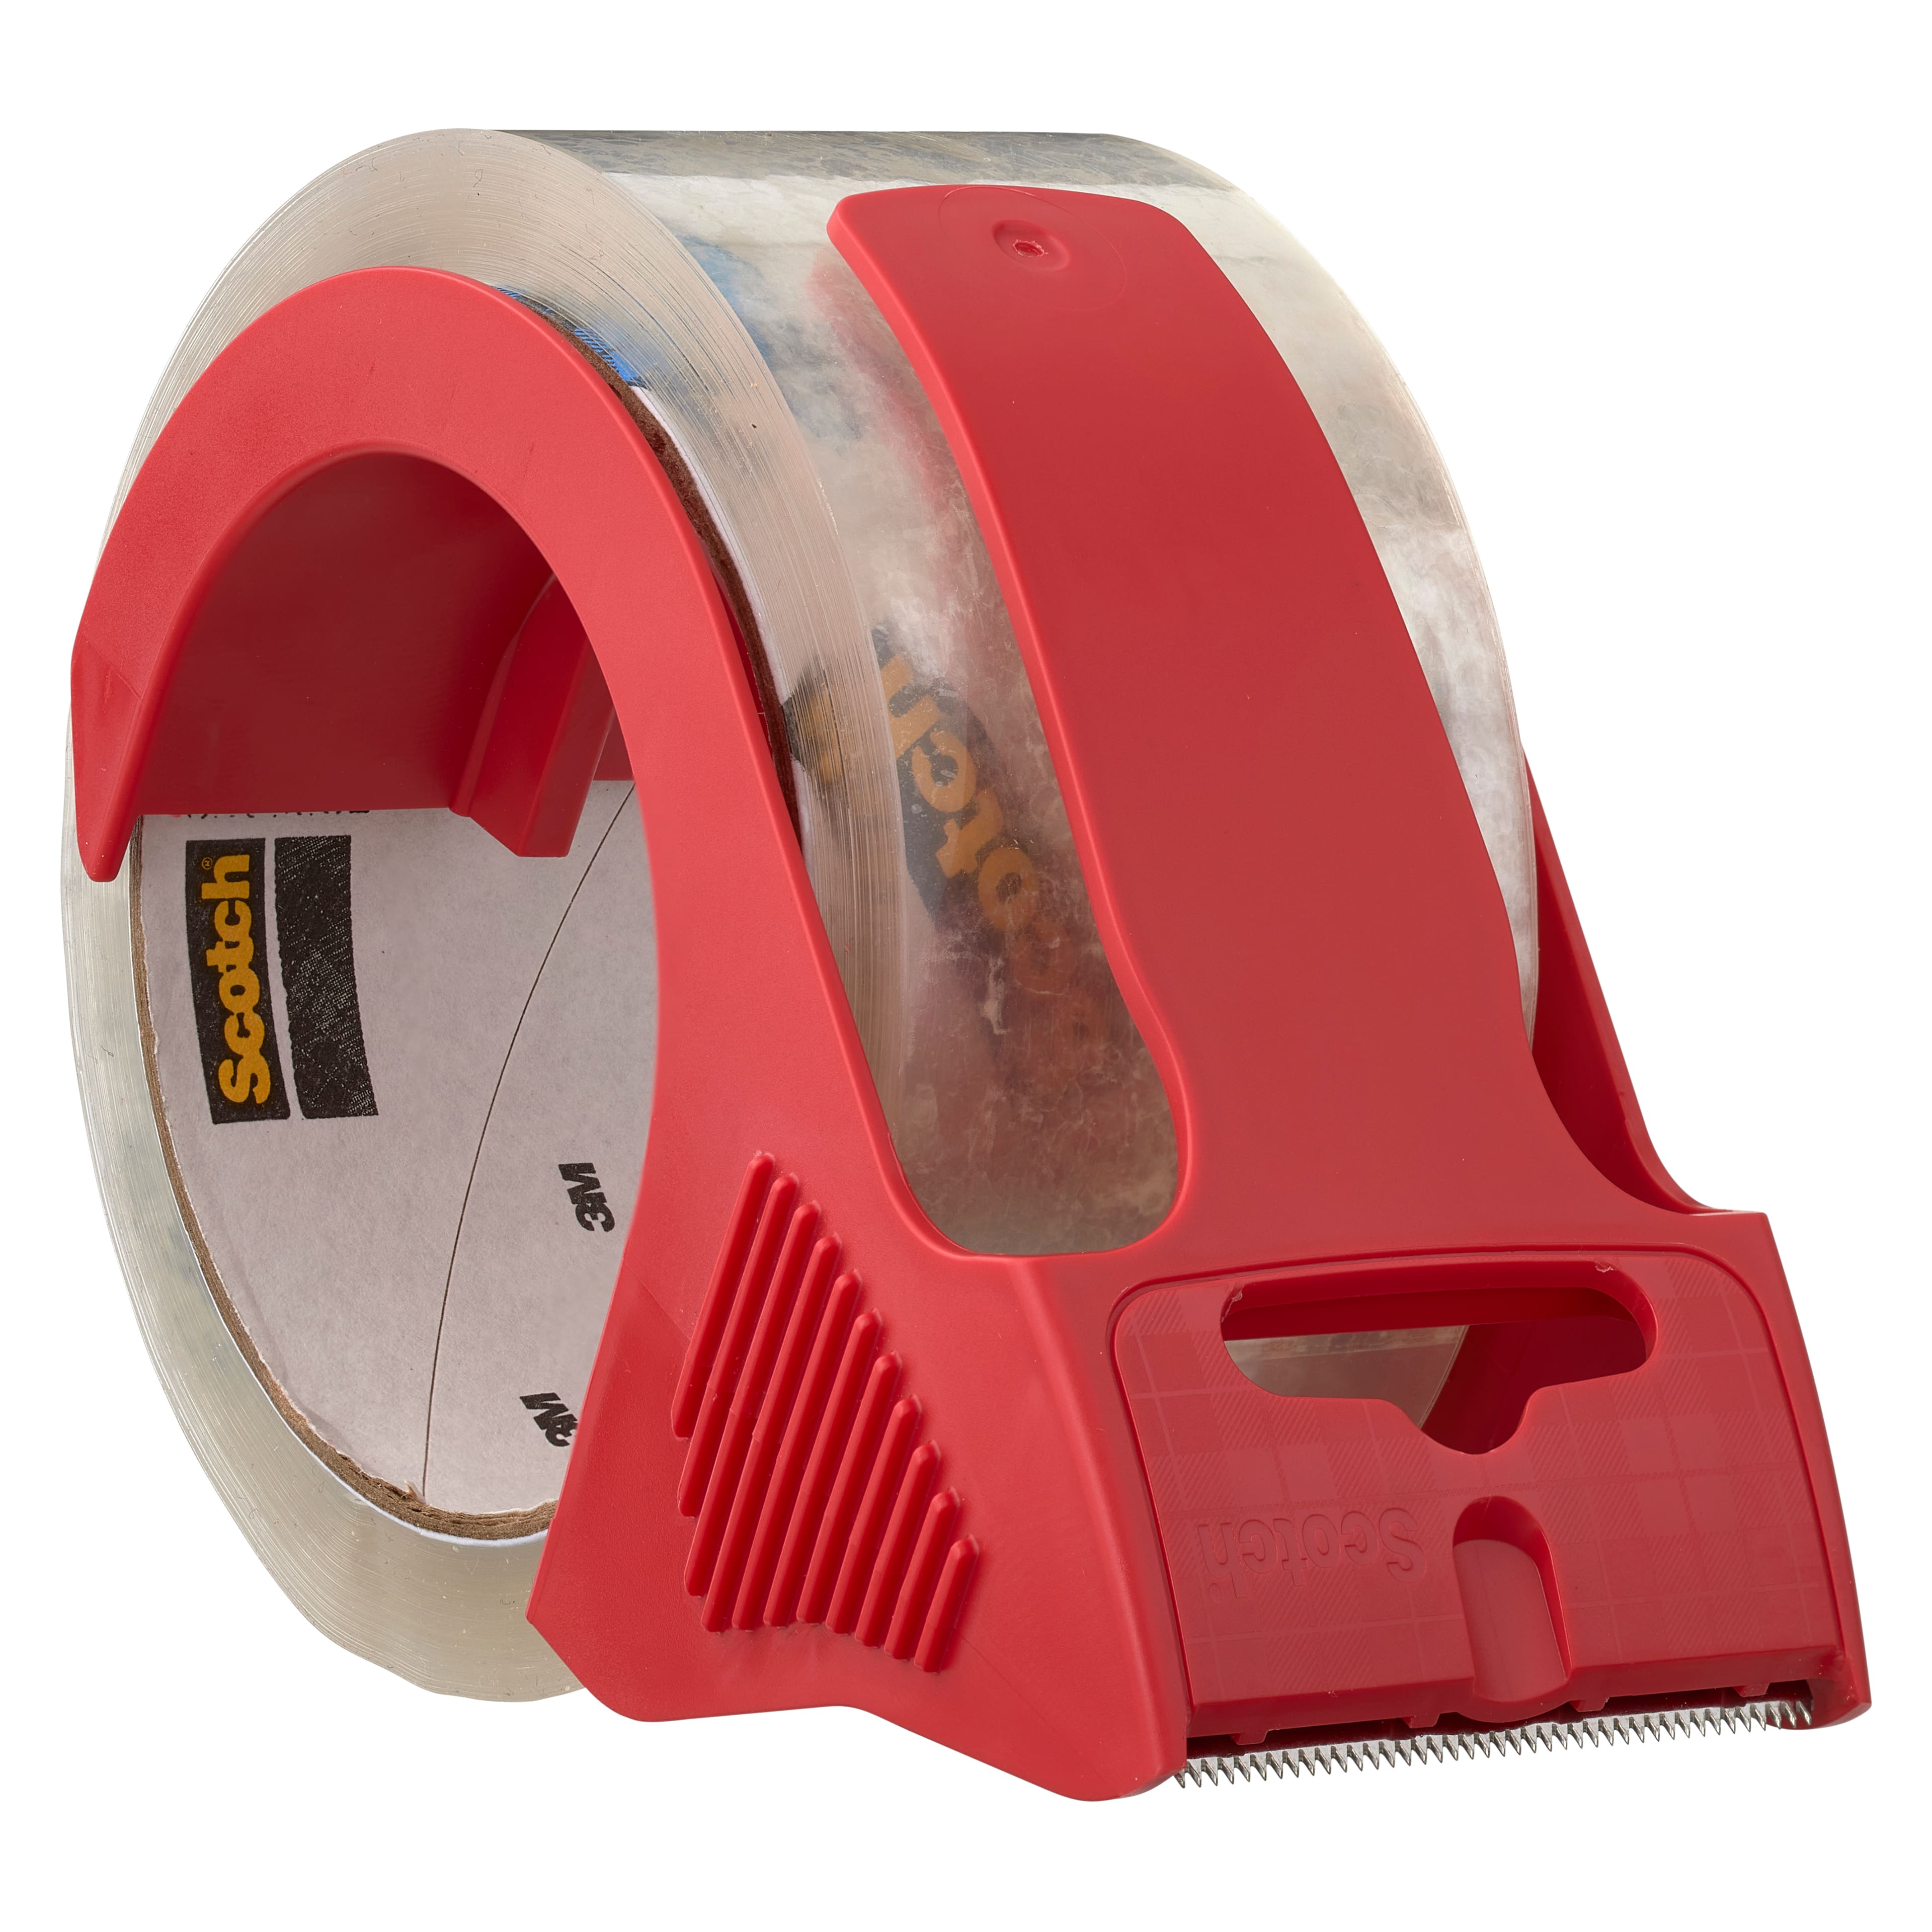 Scotch® Heavy Duty Shipping Packaging Tape with Dispenser